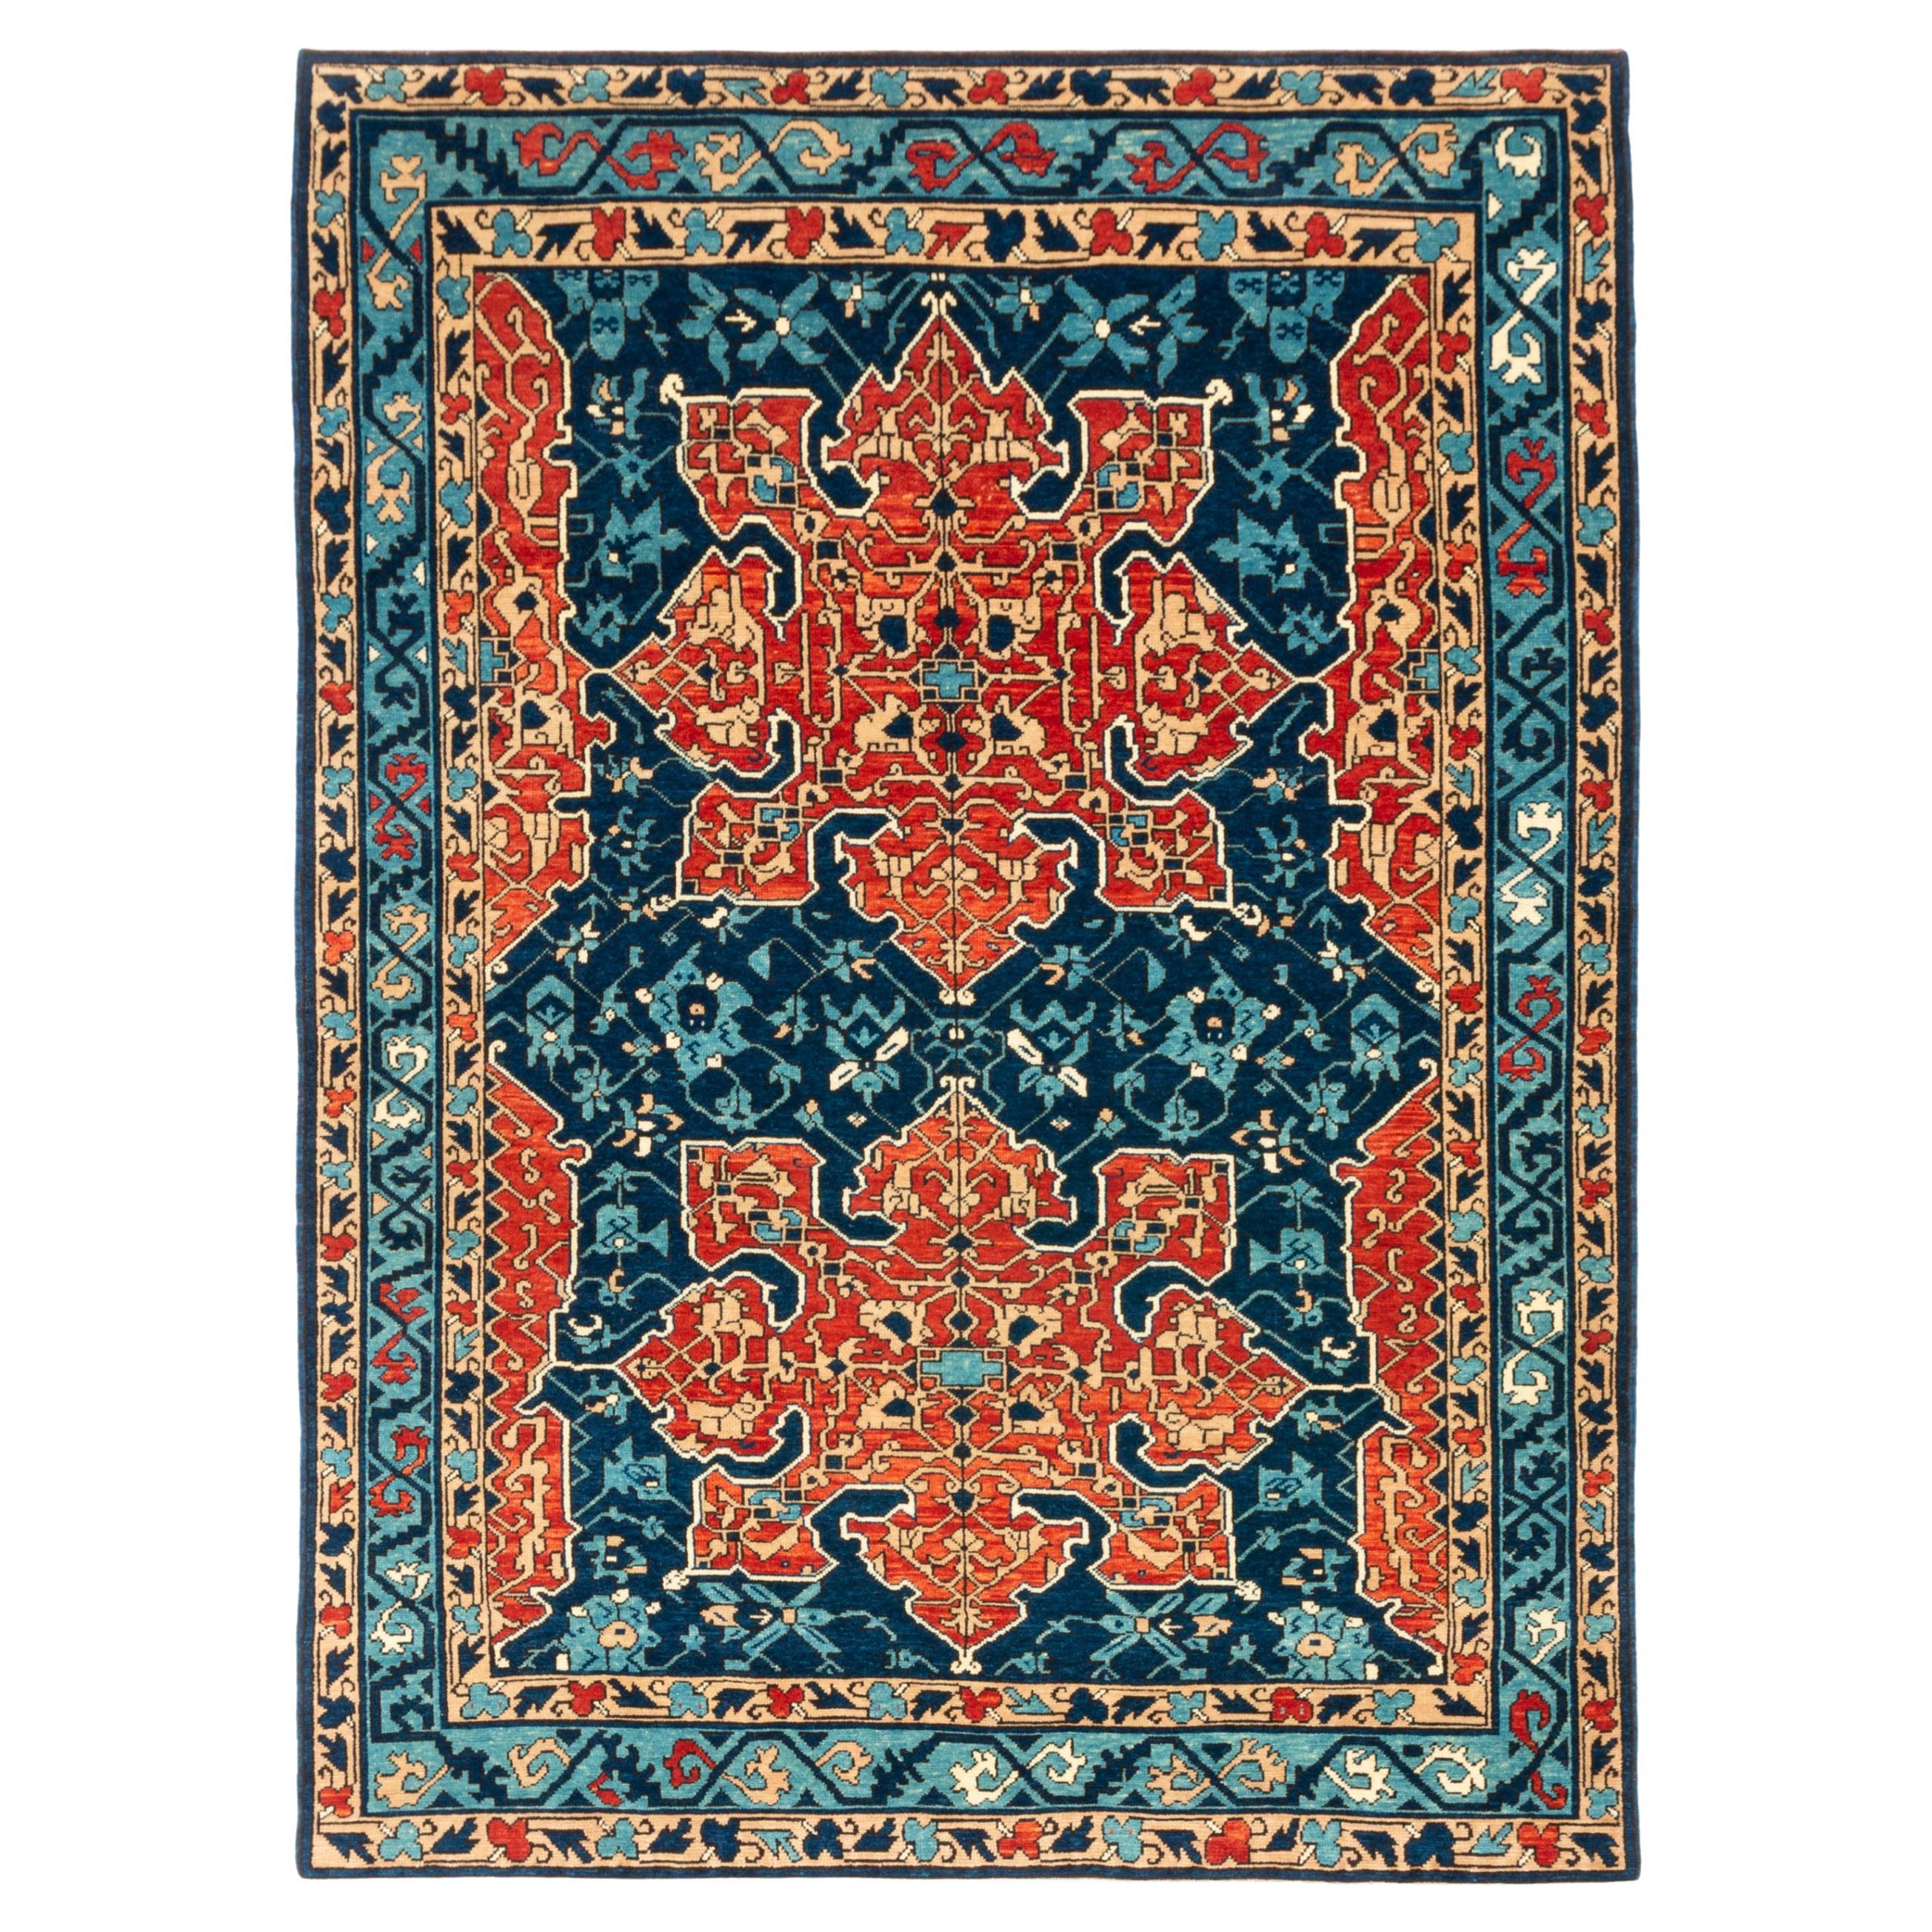 Ararat Rugs Star Ushak Carpet 16th Century Museum Piece Revival Rug Natural Dyed For Sale